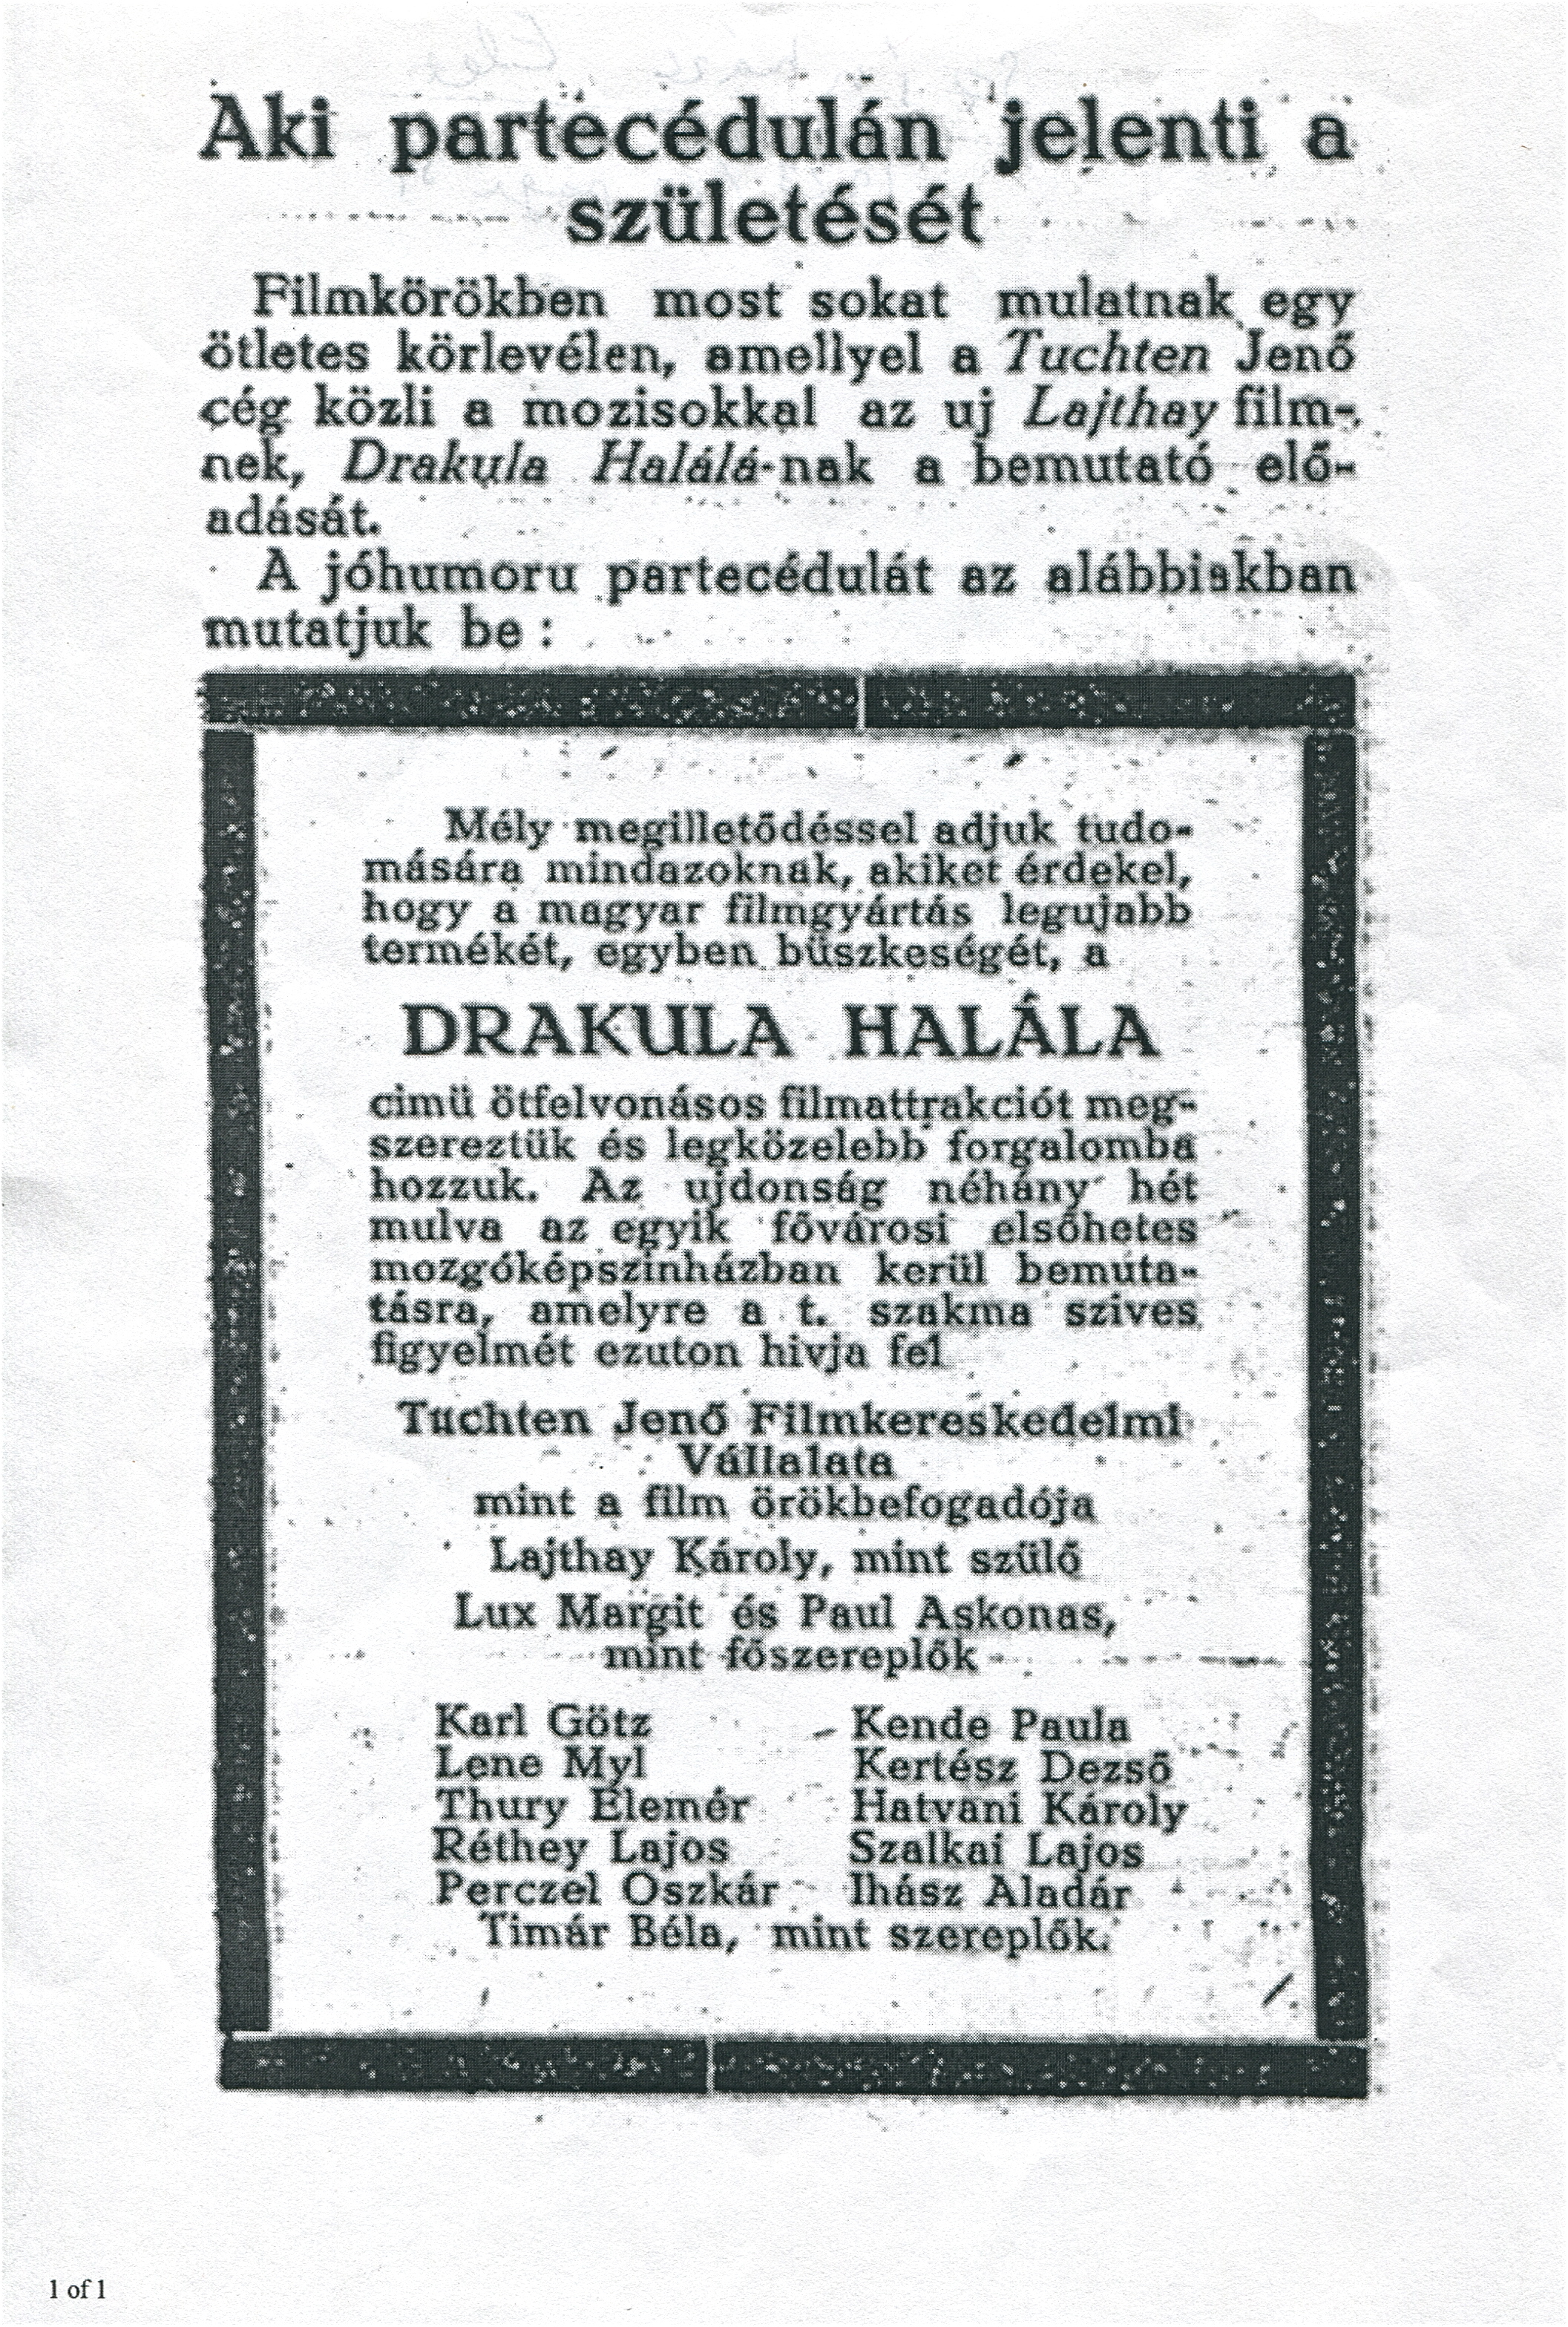 An ad from a trade journal promoting the film.